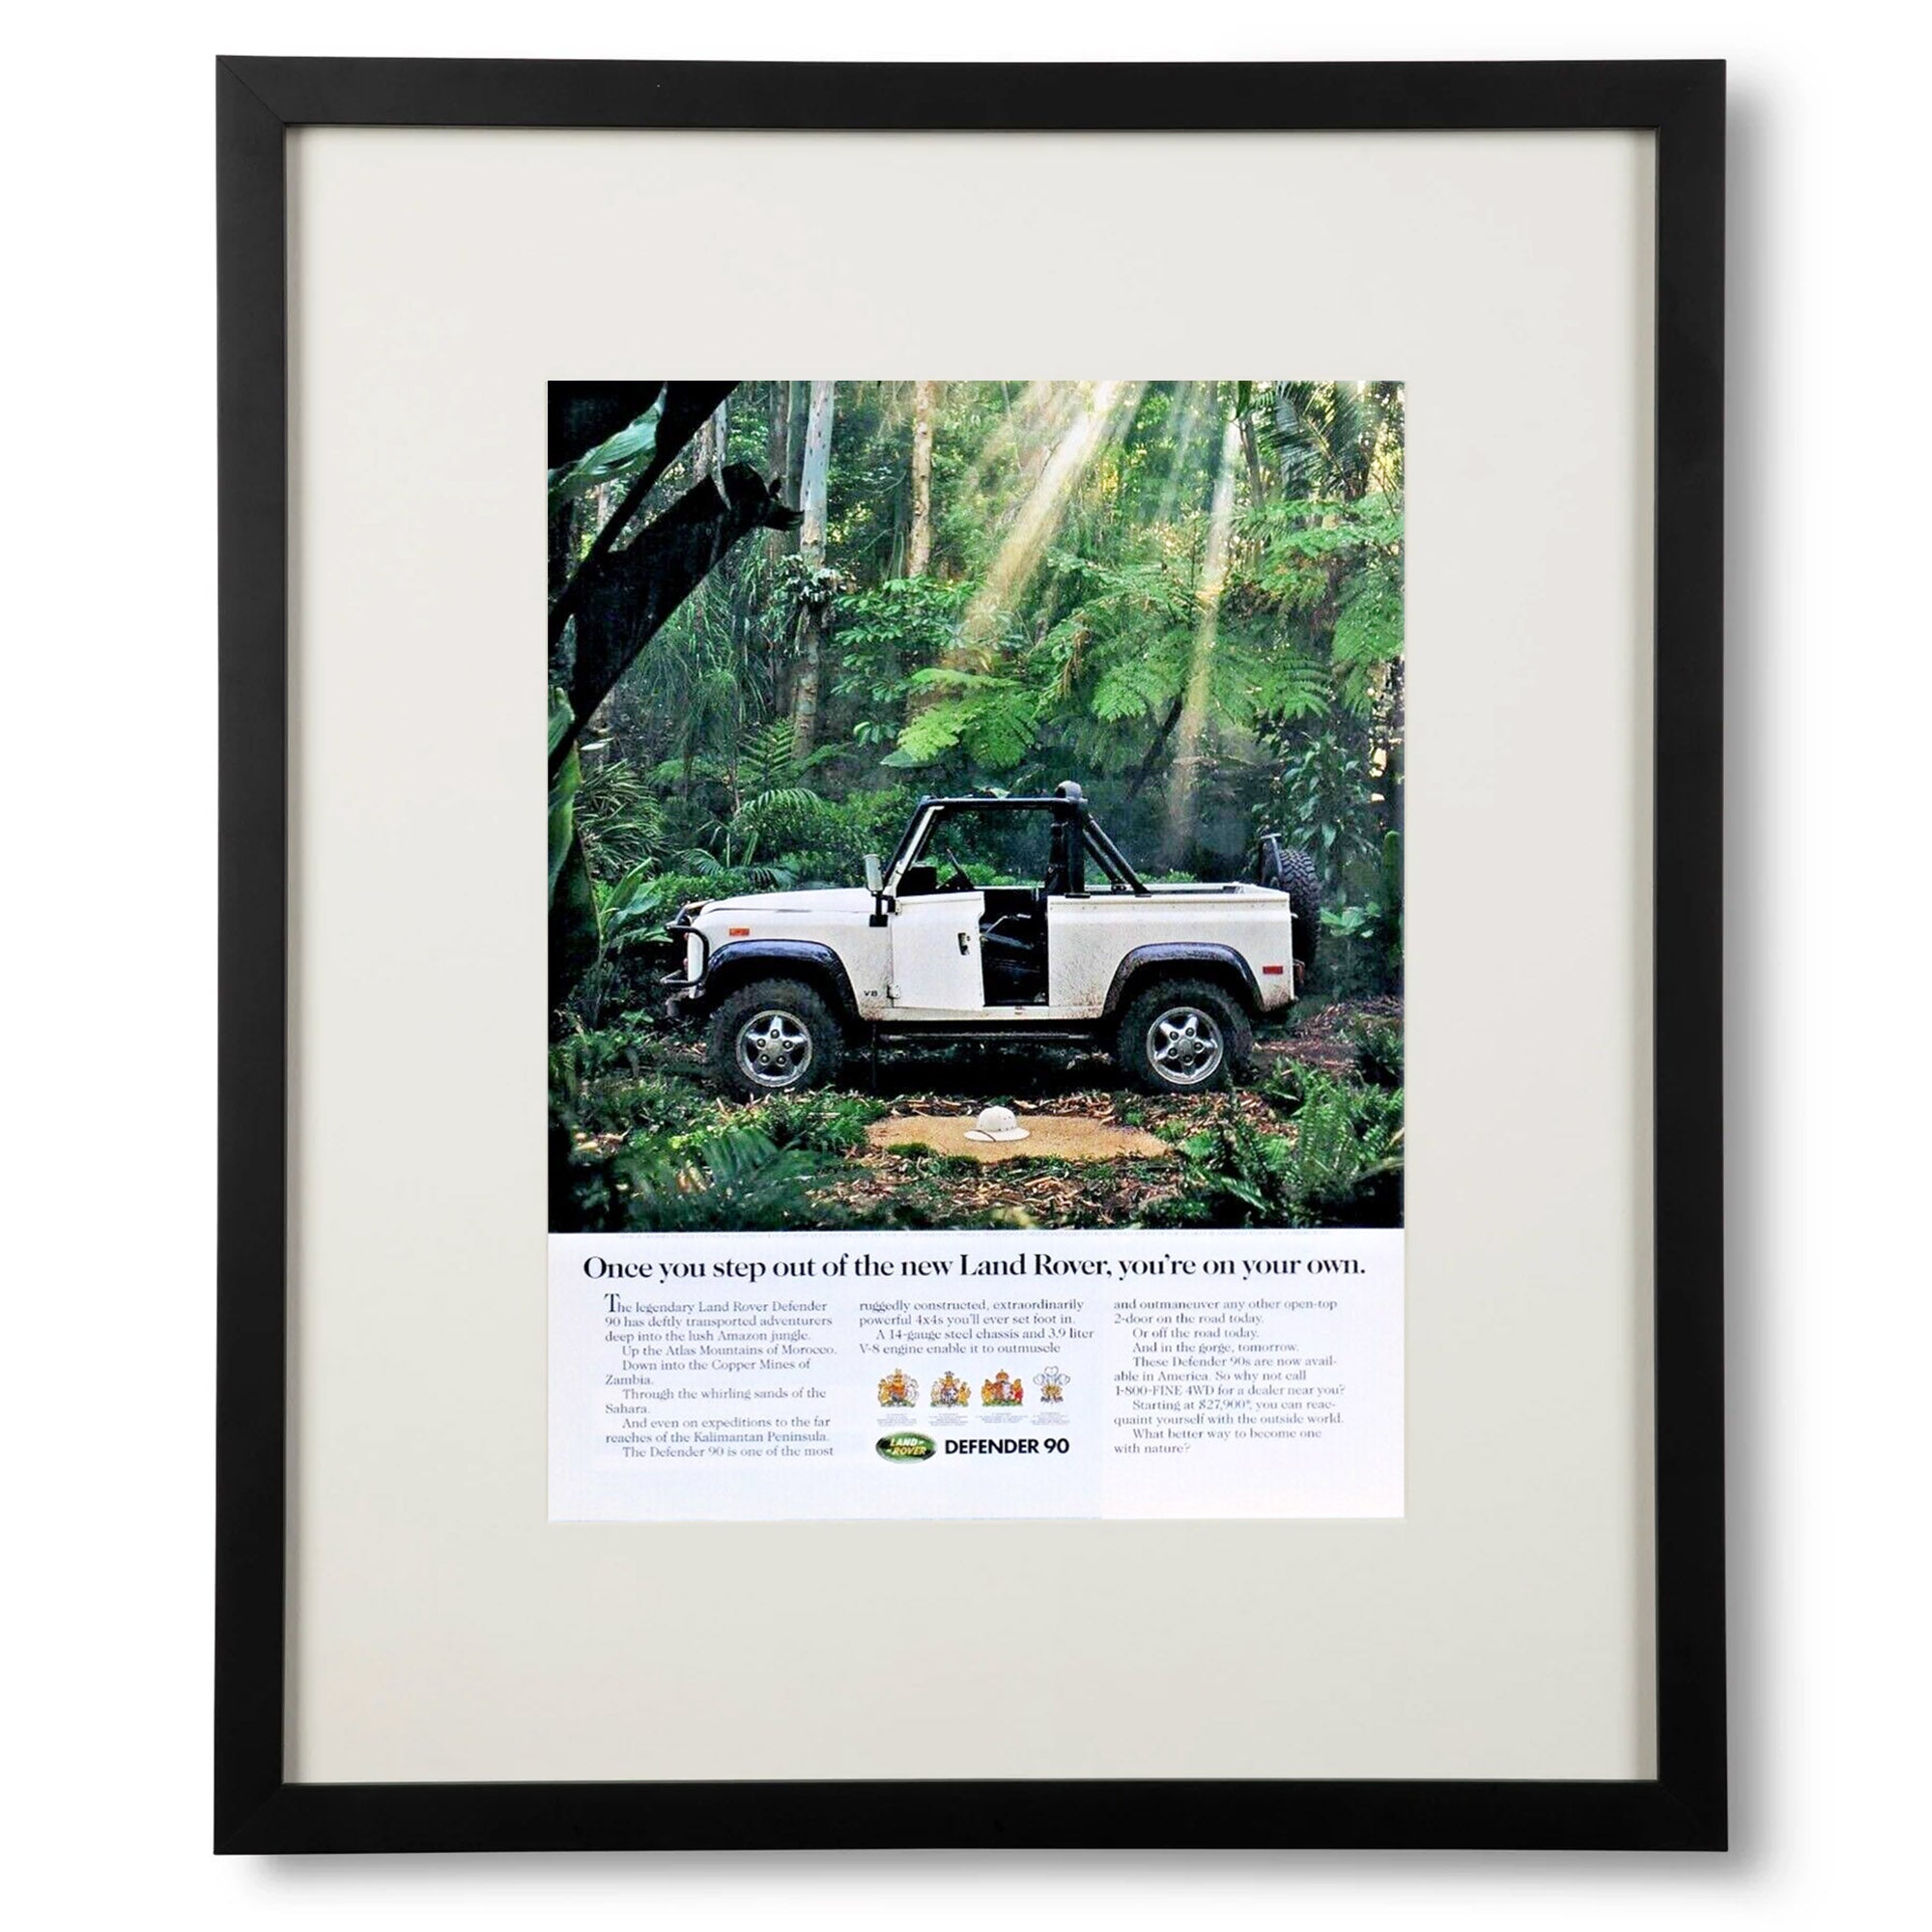 Vintage Land Rover Step Out of a New Defender Advertisement